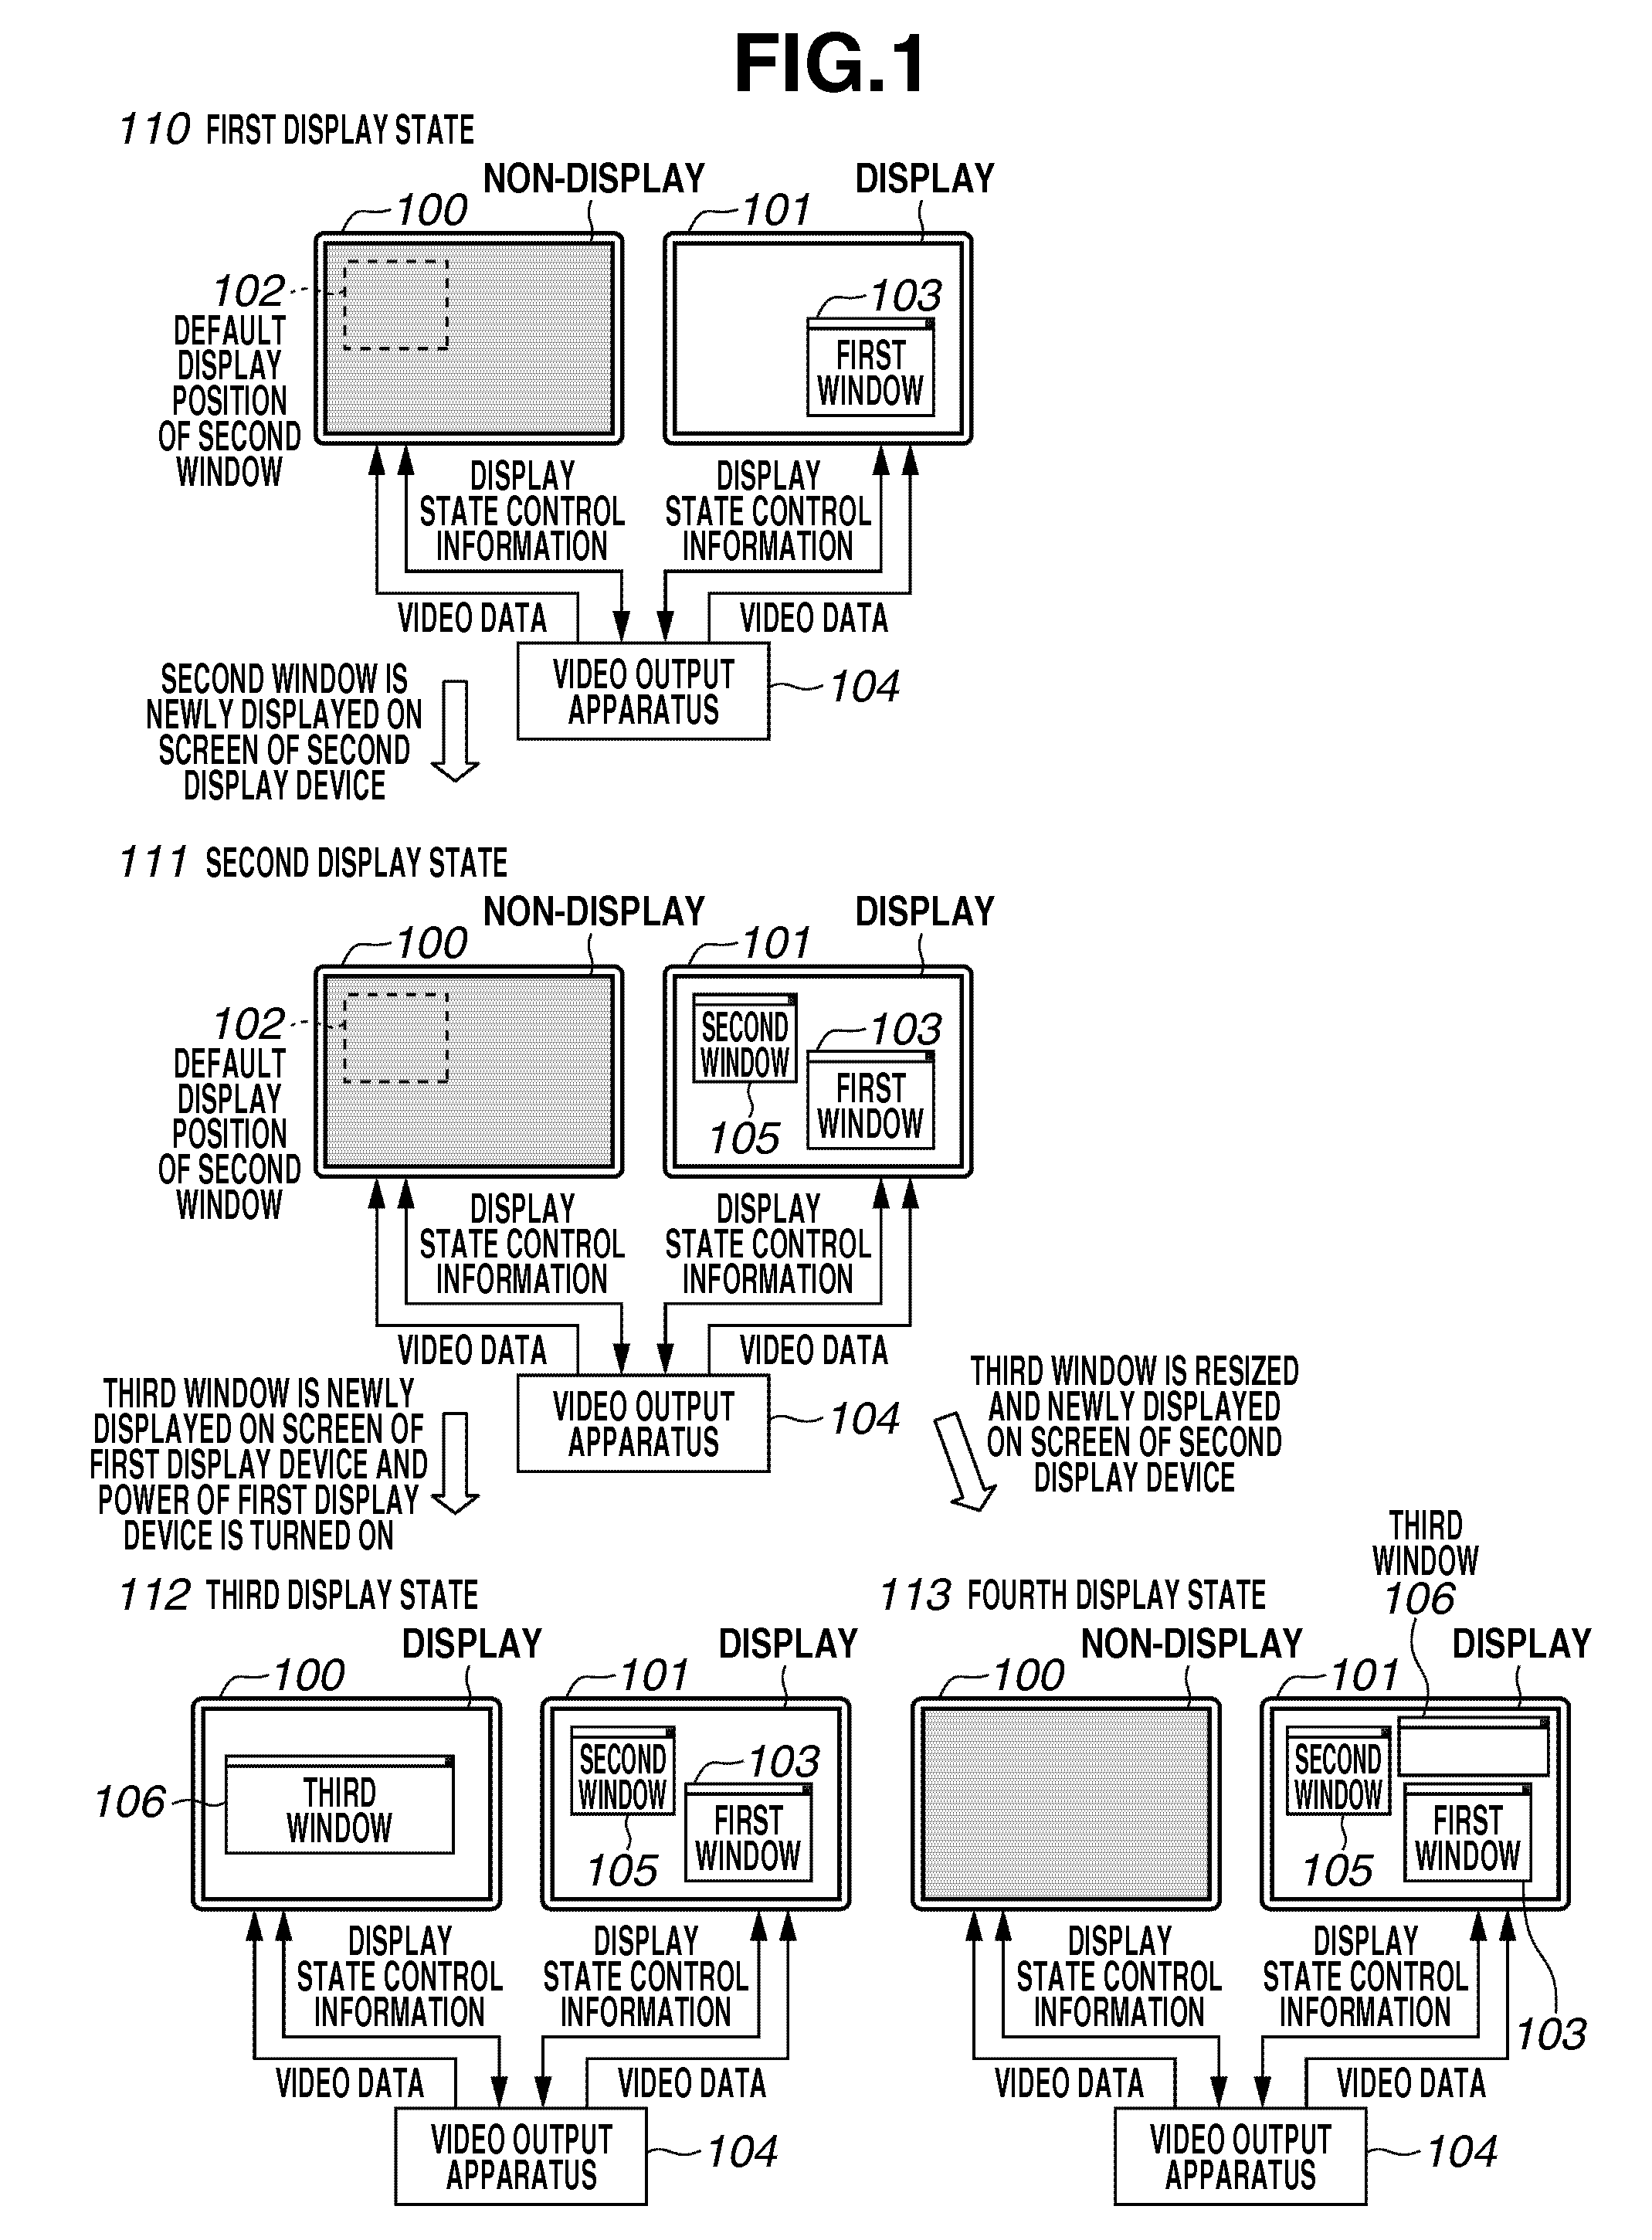 Video output apparatus and video output method